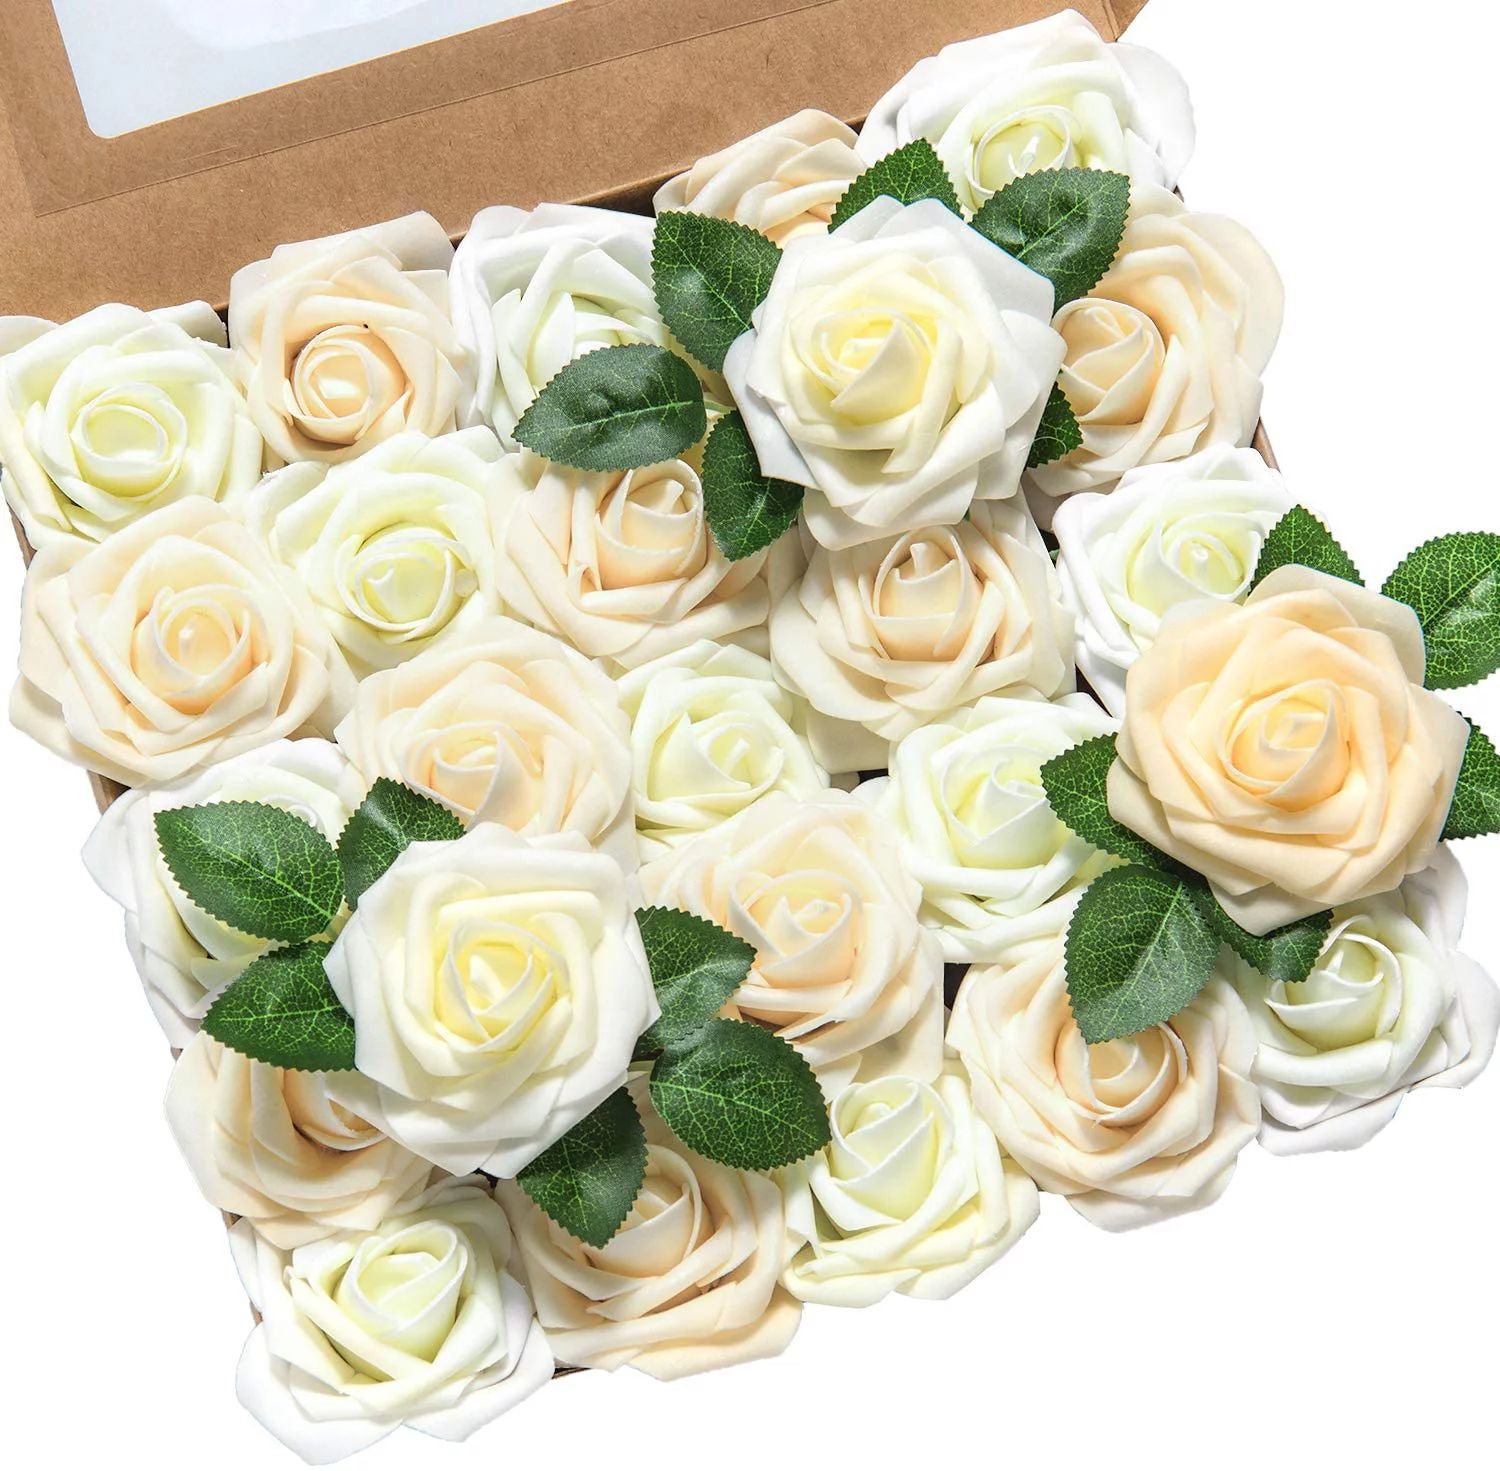 Artificial Flowers 25pcs Real Looking Ivory Cream Heirloom Roses w/Stem for DIY Wedding Bouquets ... | Walmart (US)